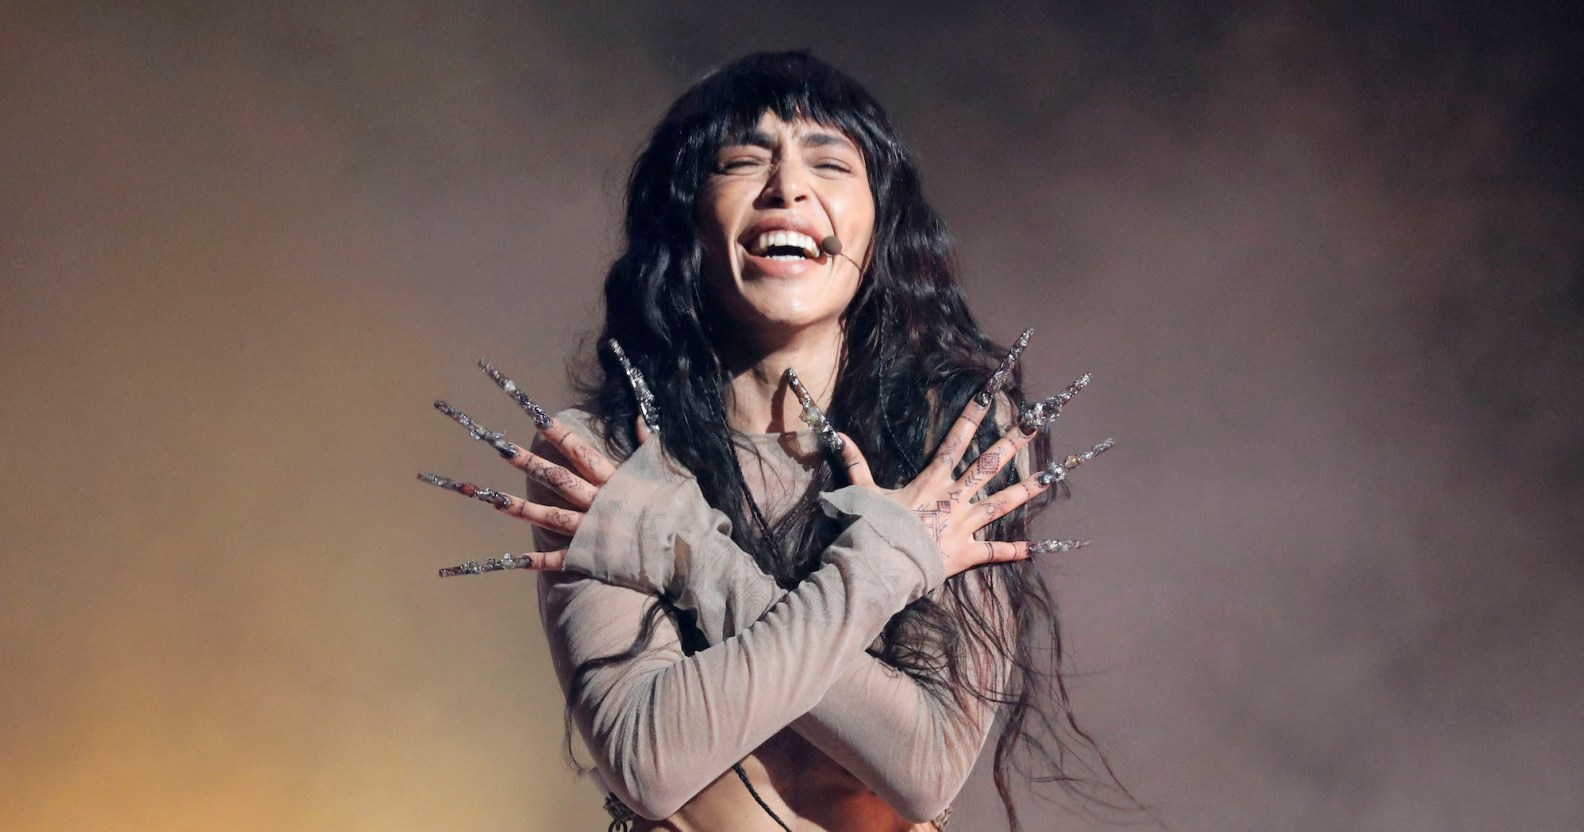 Swedish singer Loreen (Lorine Talhaoui) performs singing her song "Tattoo" during the Melodifestivalen song contest at Friends Arena in Stockholm, Sweden, on March 11, 2023. - Loreen won Melodifestivalen and will represent Sweden in the Eurovision Song Contest in Liverpool in May 2023.